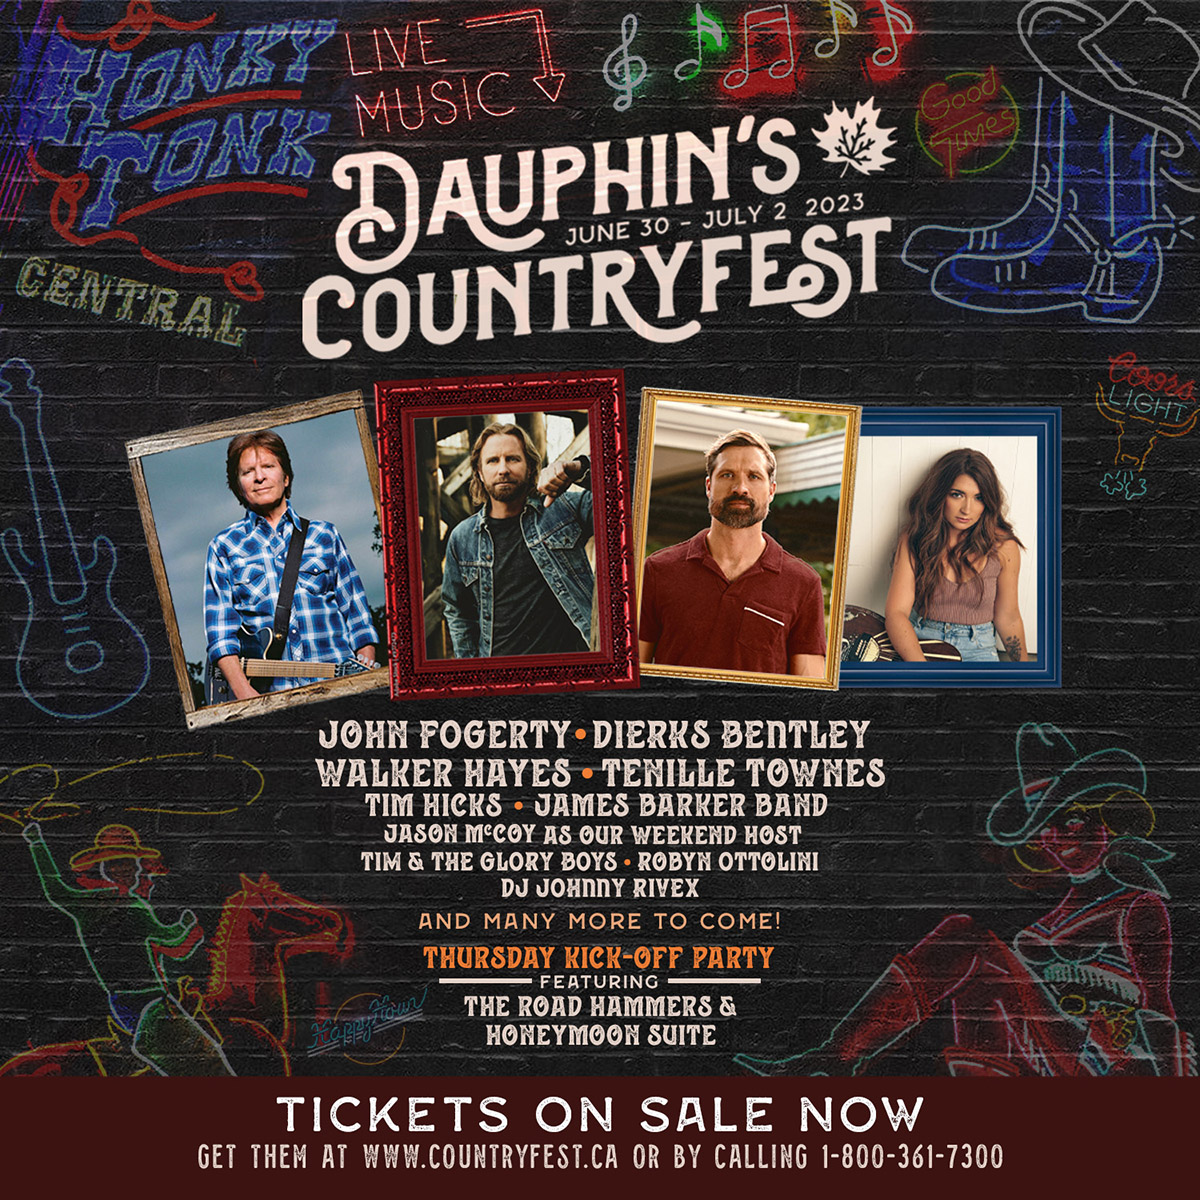 Dauphin's Countryfest June 30 - July 2 2023 Poster